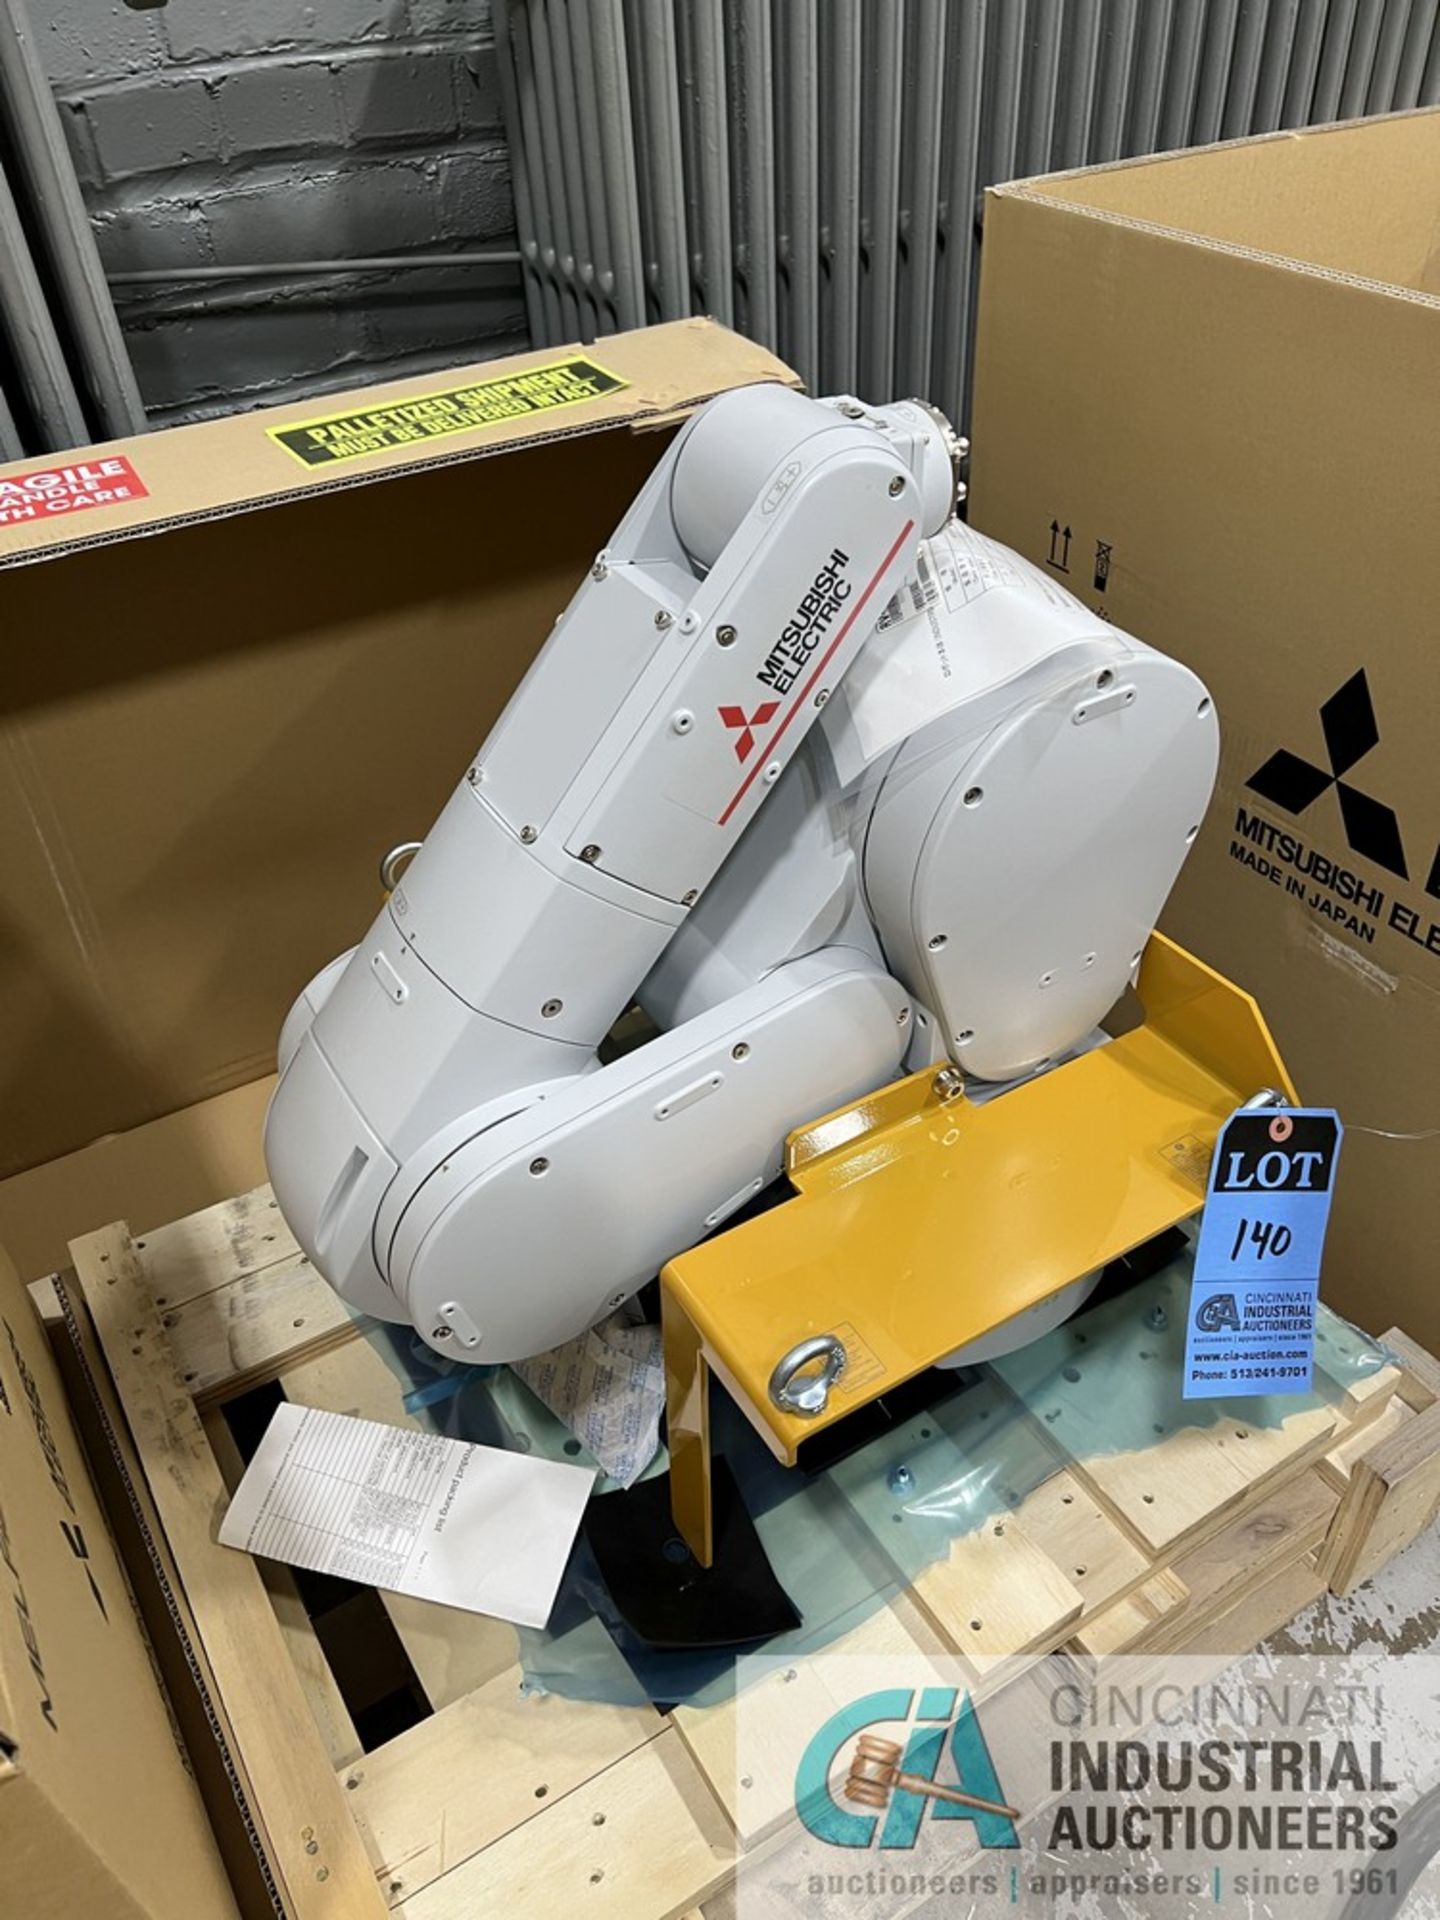 7 KG MITSUBISHI MODEL RV7FRD 6-AXIS ROBOT; S/N BC1020036R, CR800-07VD CONTROLLER, R32TB PENDANT, - Image 2 of 10